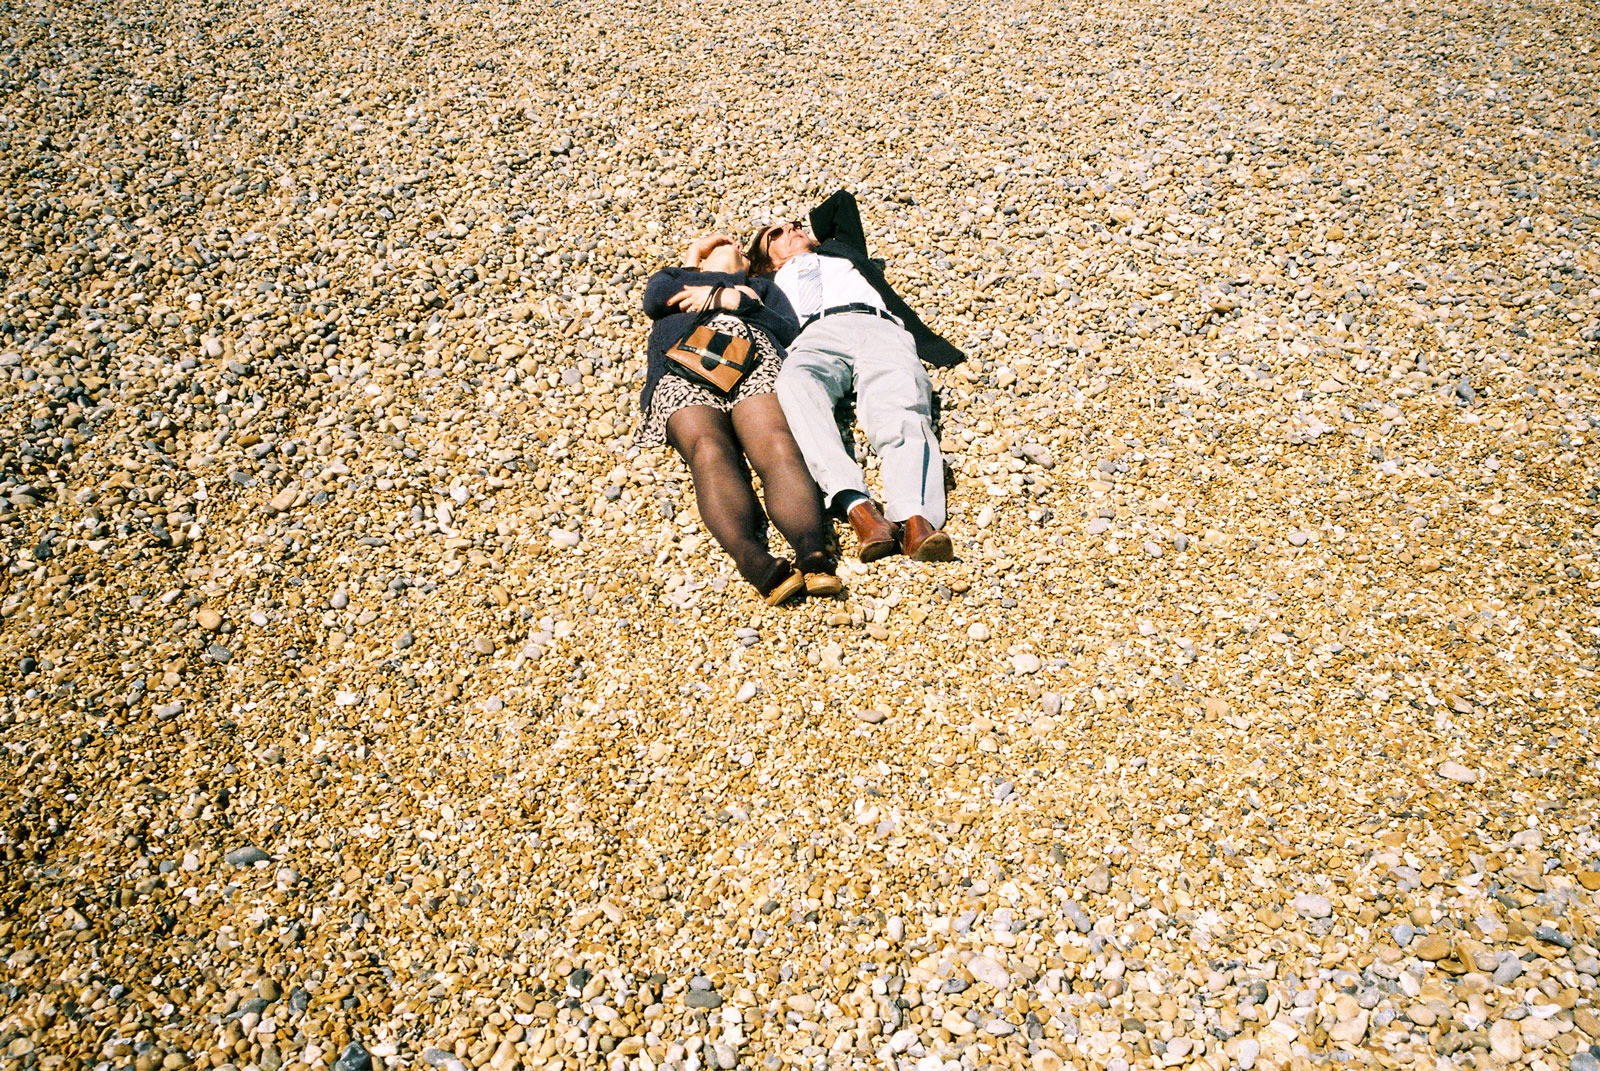 A-COUPLE-NAP-ON-A-PEBBLE-BEACH-FULLY-CLOTHED-IN-BRIGHTON-UK